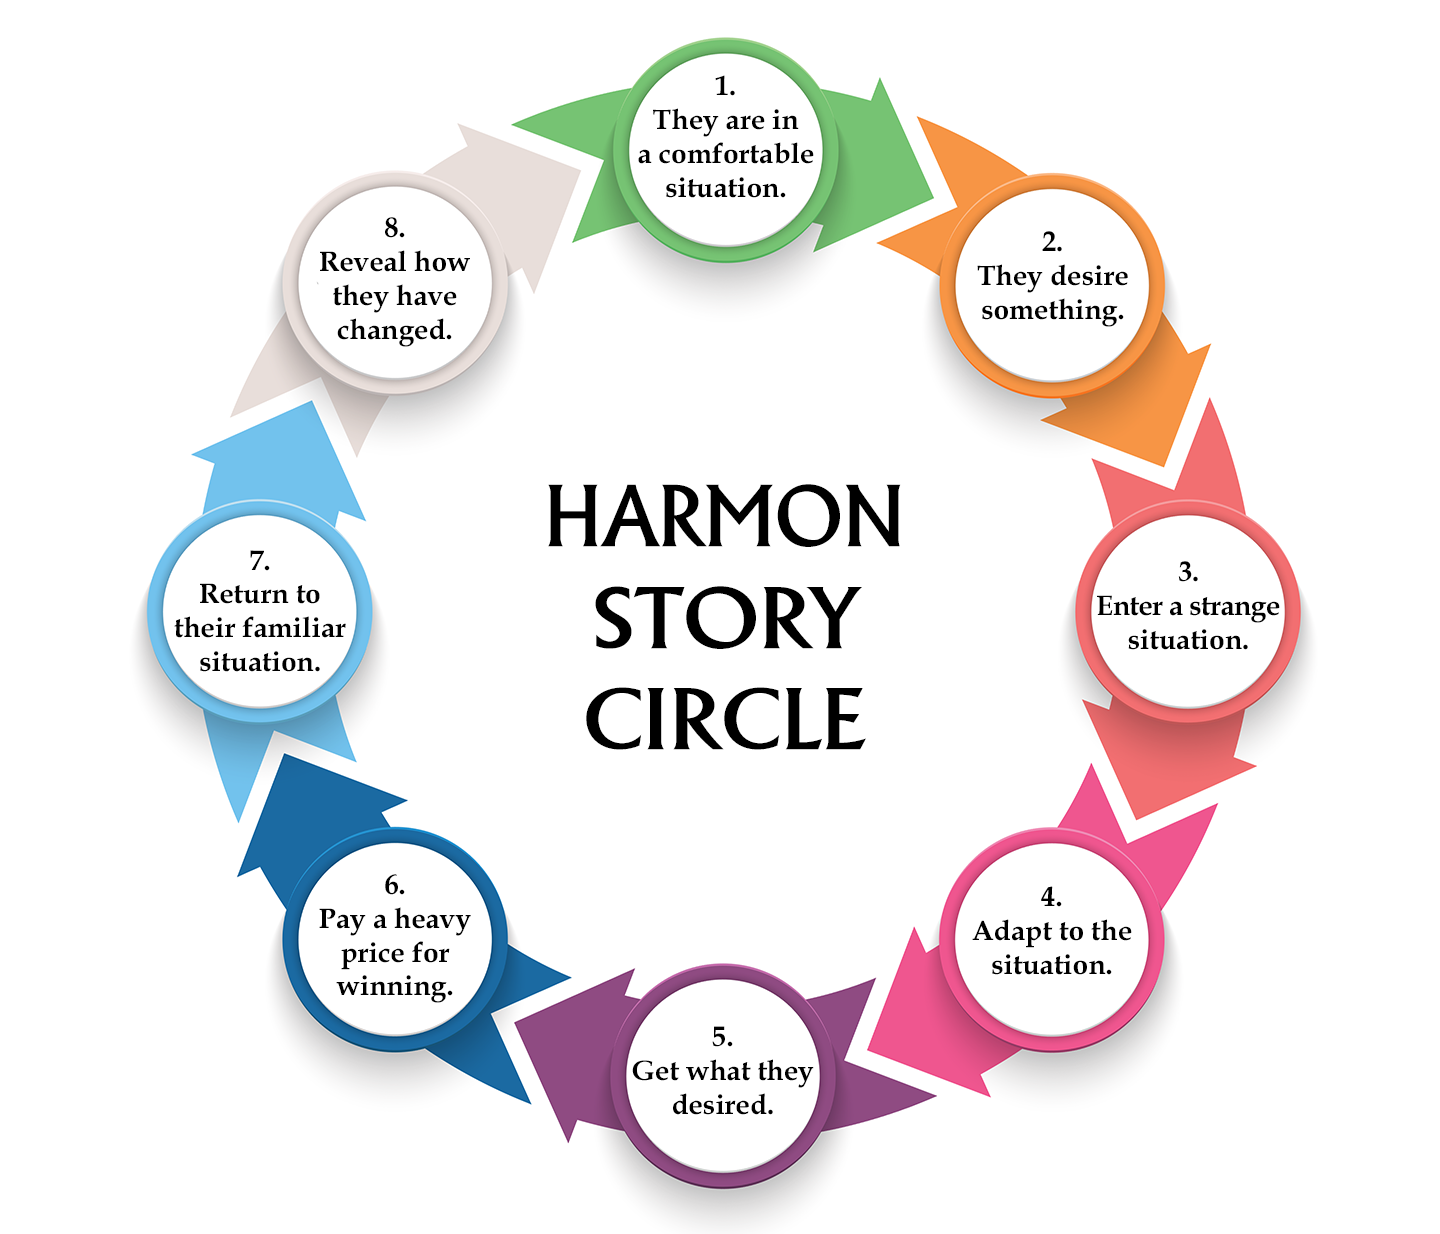 Harmon Story Cycle 1. They are in a comfortable situation. 2. They desire something. 3. Enter a strange situation. 4. Adapt to the situation. 5. Get what they desired. 6. Pay a heavy price for winning. 7. Return to their familiar situation. 8. Reveal how they have changed.